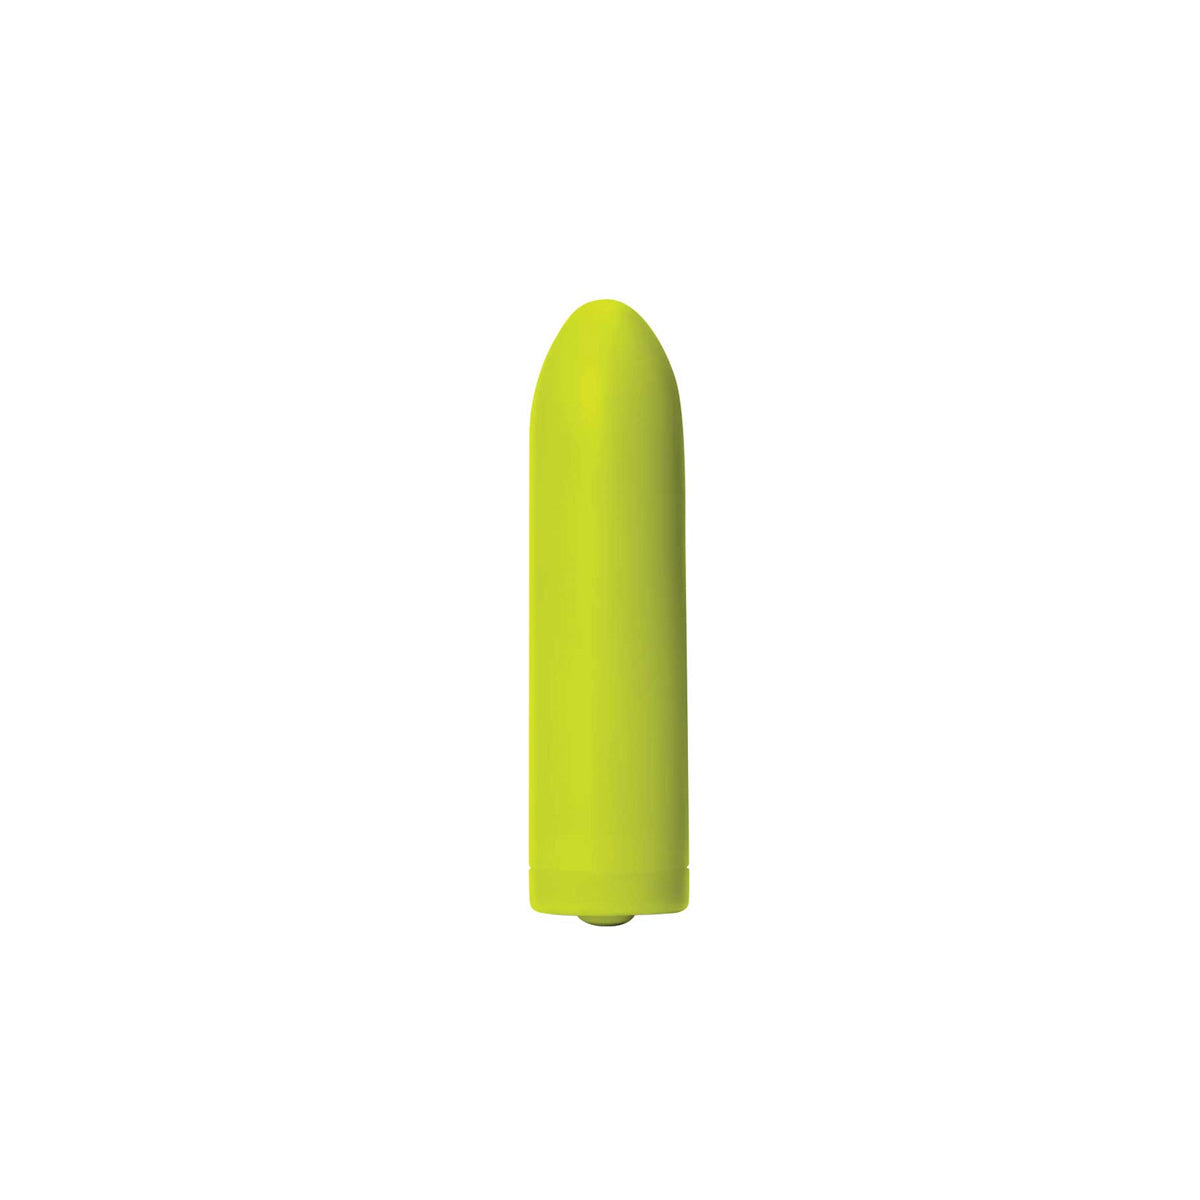 Lime green mini bullet vibrator from Dame  Nudie Co